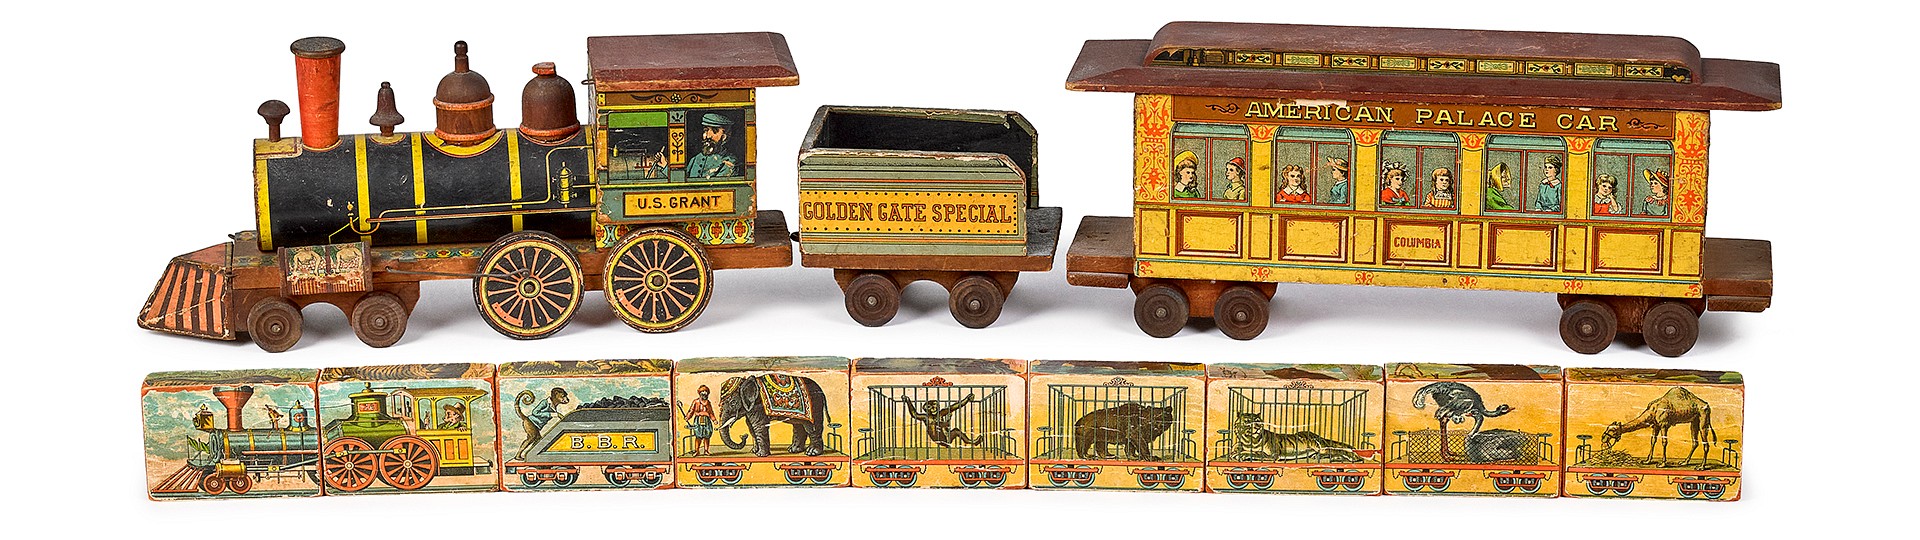 Antique Toys & Board Games by Pook & Pook Inc